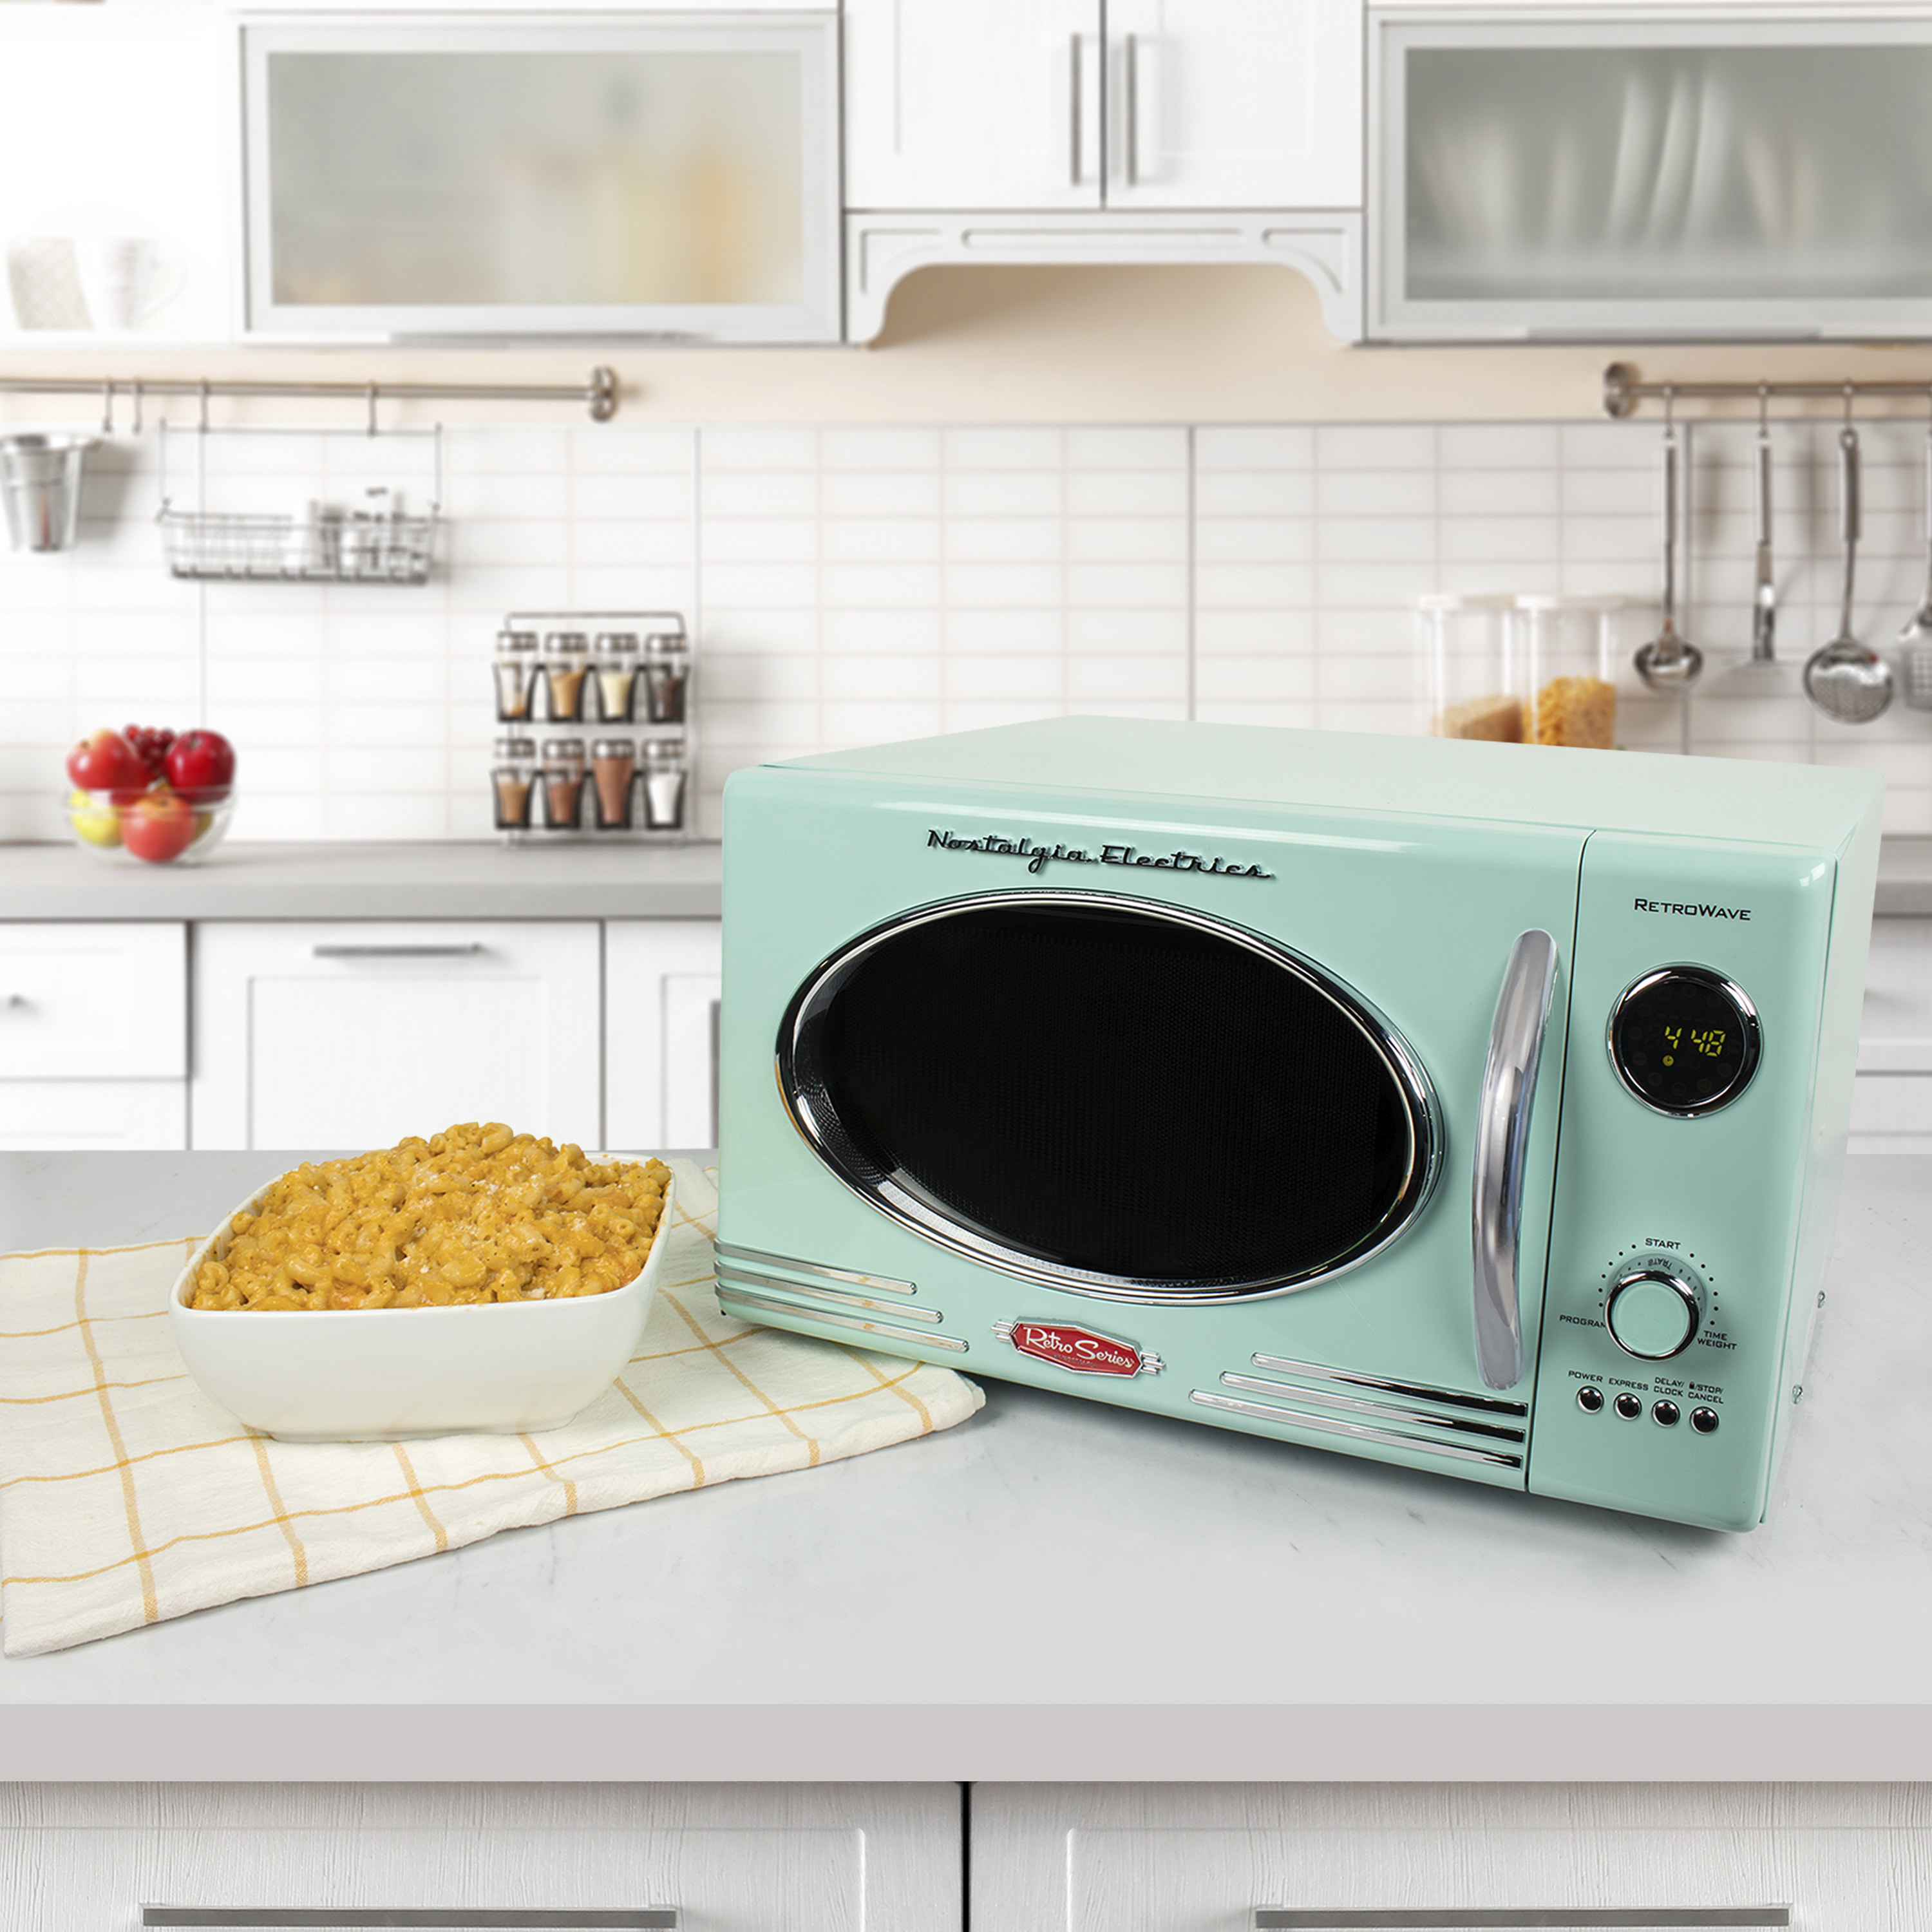 the microwave on a counter with food